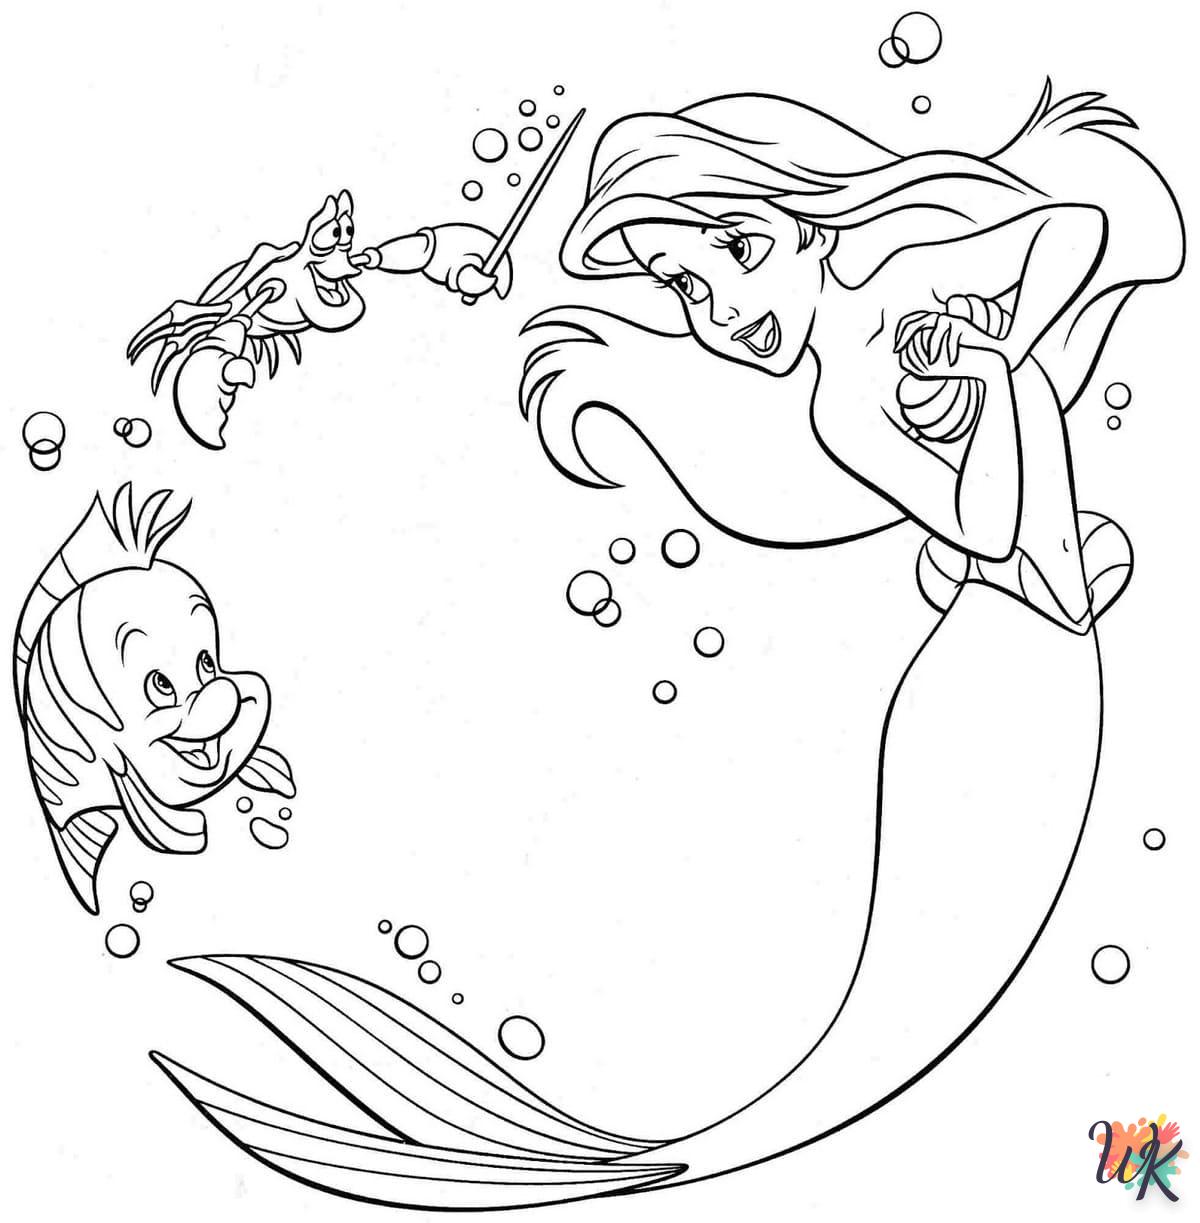 Disney coloring page to print for 3 year olds